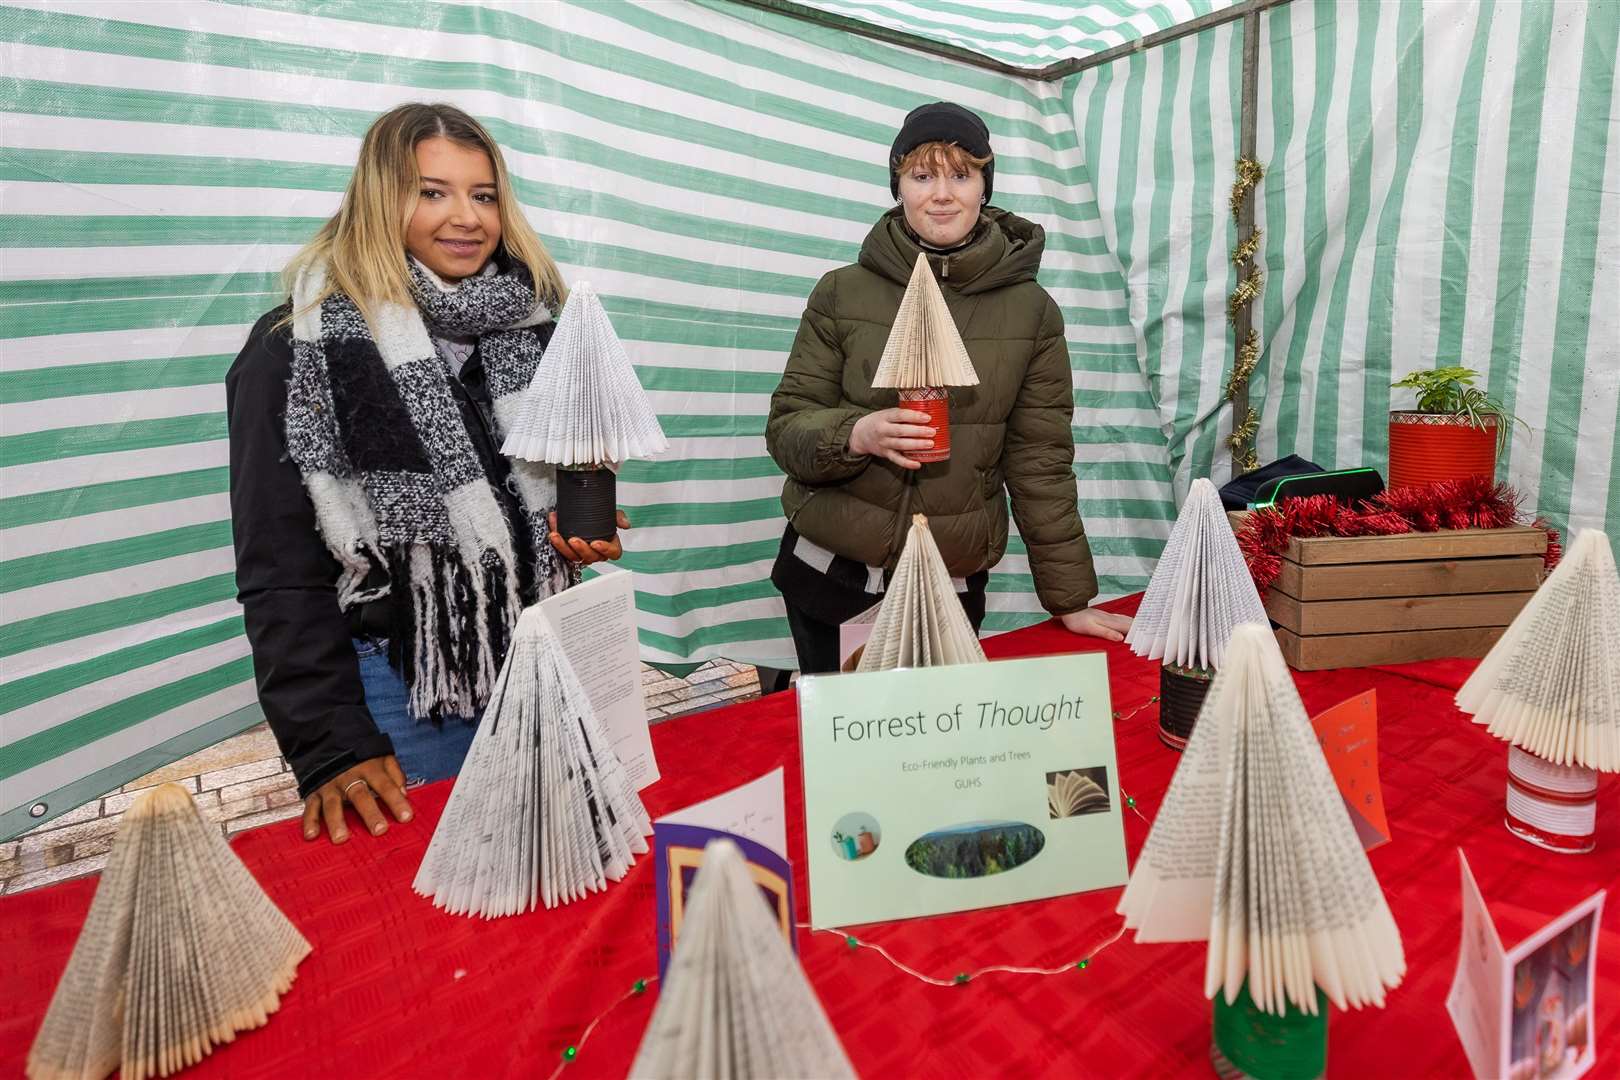 Youth Enterprise Scotland, Inverness Christmas Markets 2021. Glen Urquhart High School pupils; Abi Chisholm and Catherine Hart , Forrest of Thought.